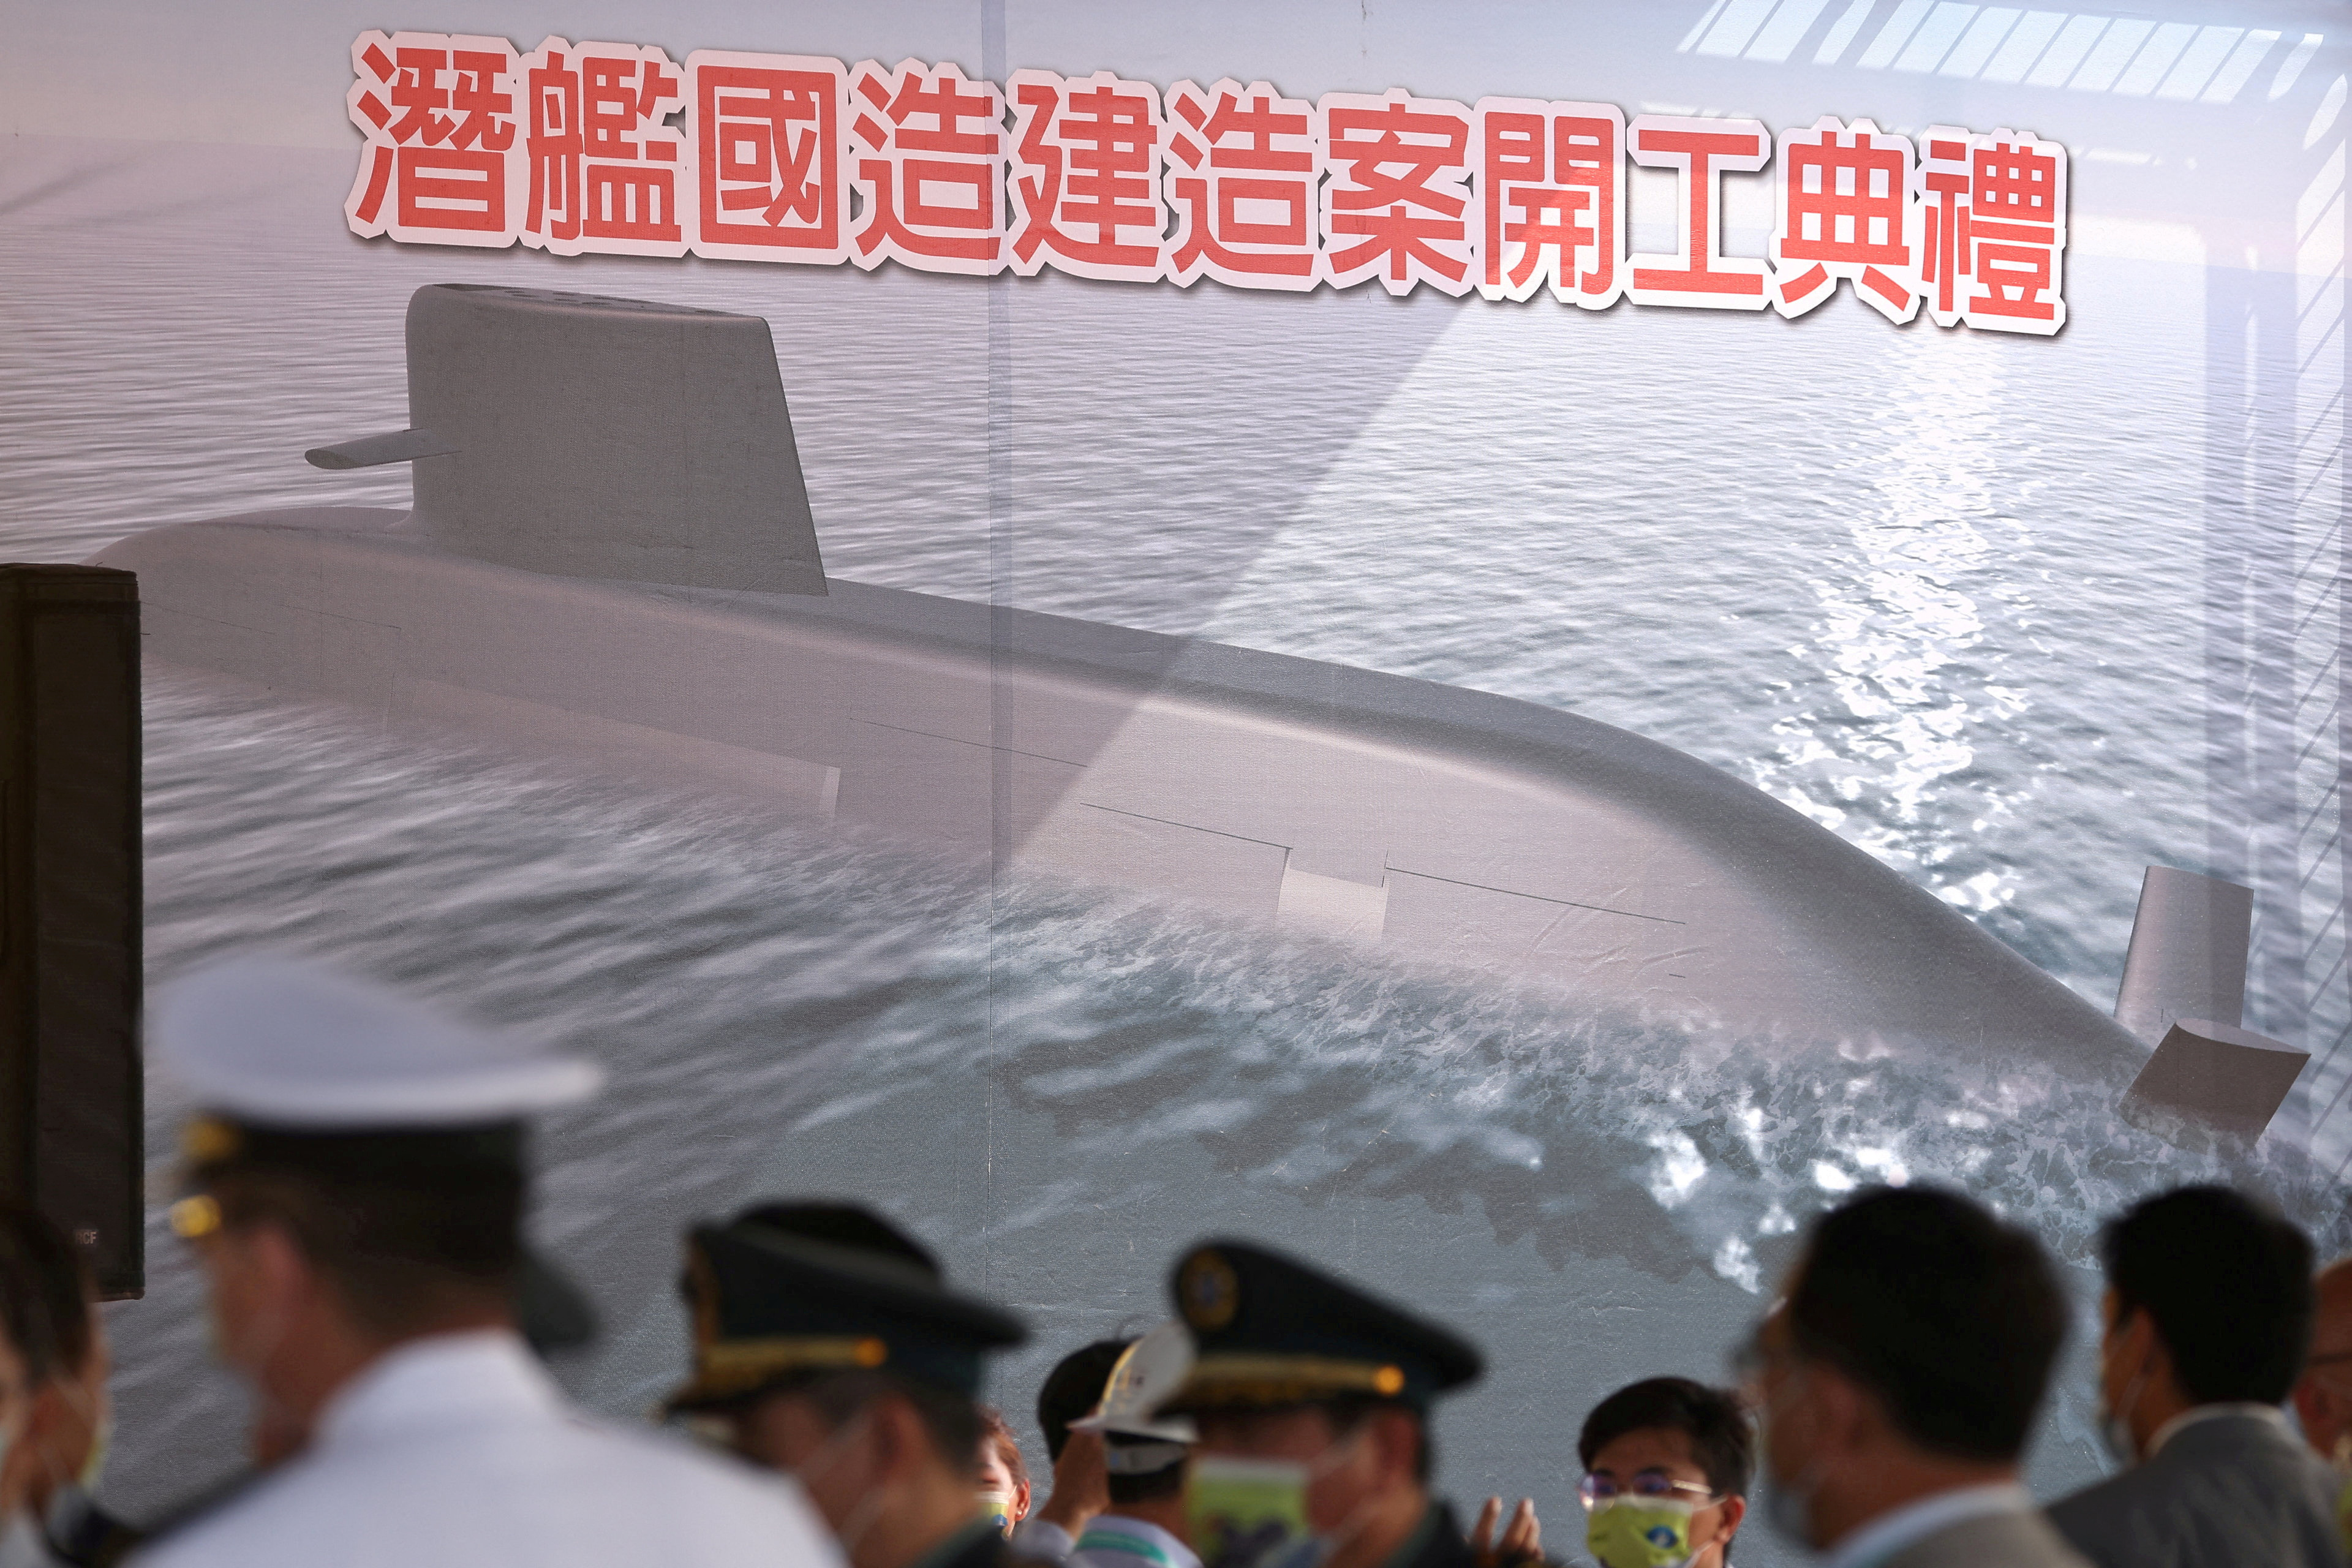 People attend the ceremony for the start of construction of a new submarine fleet in Kaohsiung,